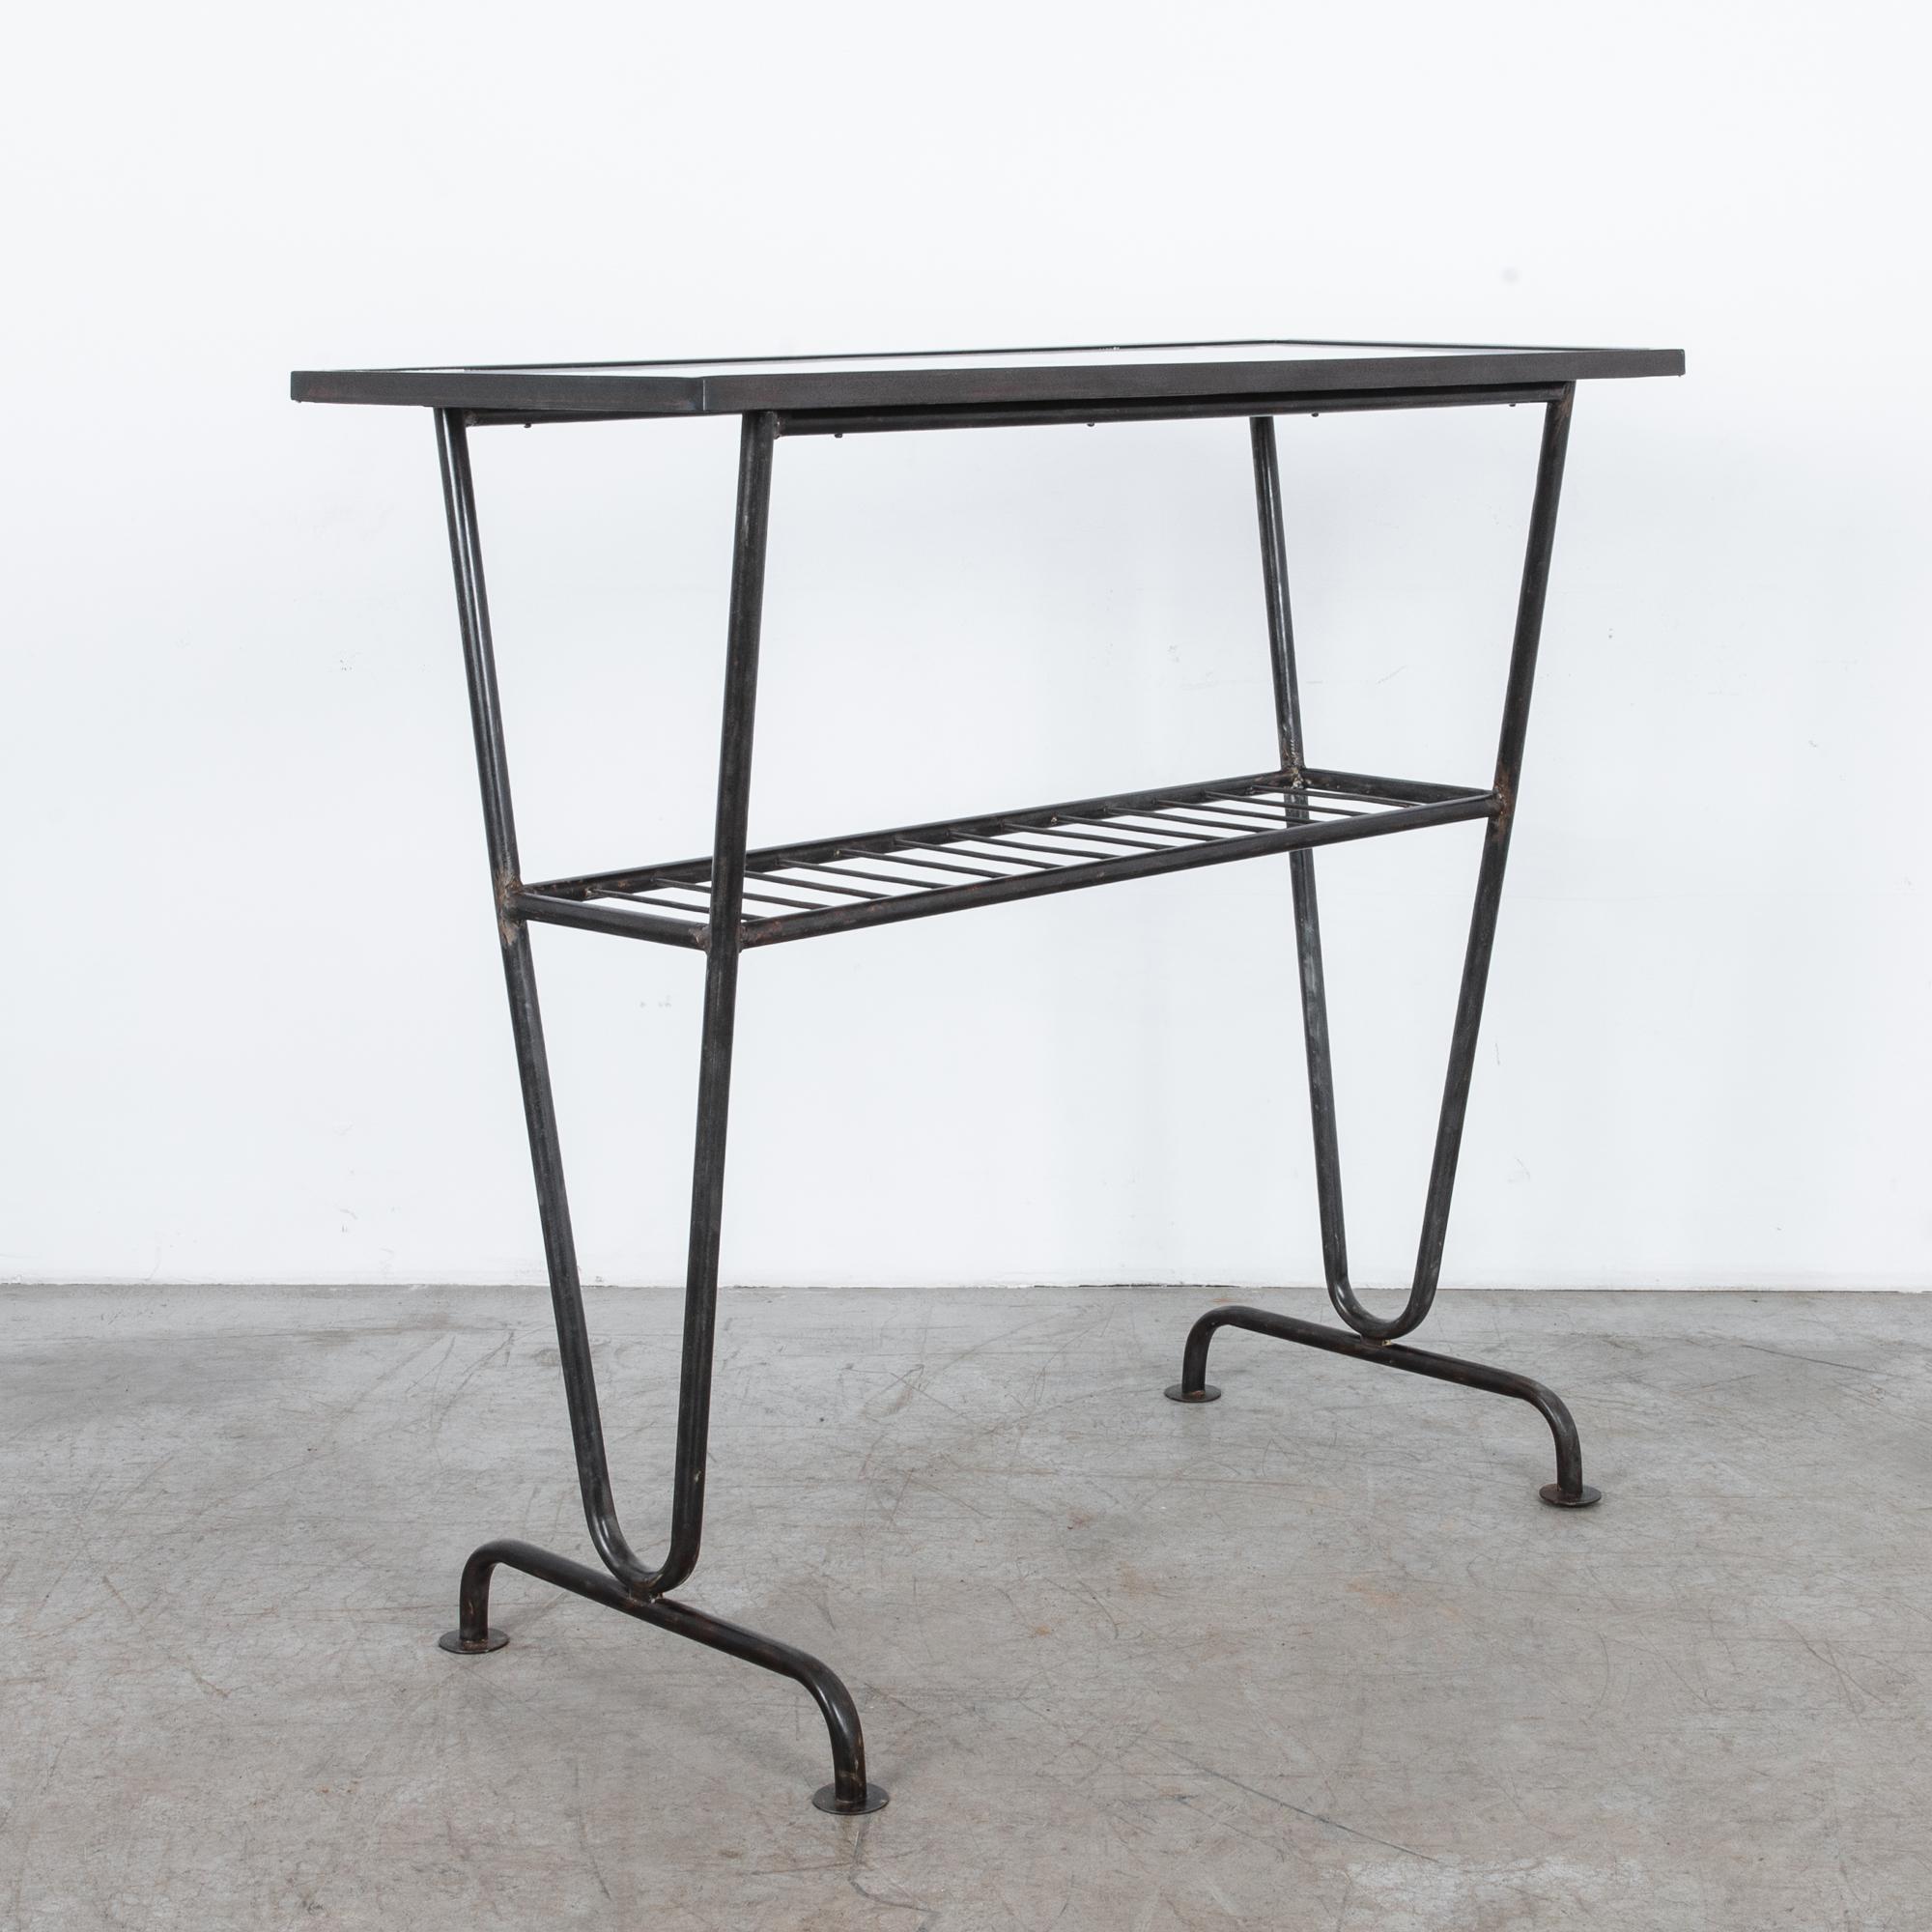 In the innovative design landscape of 1960s Czechoslovakia, this metal side table epitomizes the sleek sophistication and functional elegance of the era. Crafted with meticulous attention to detail, this piece represents the epitome of Czech